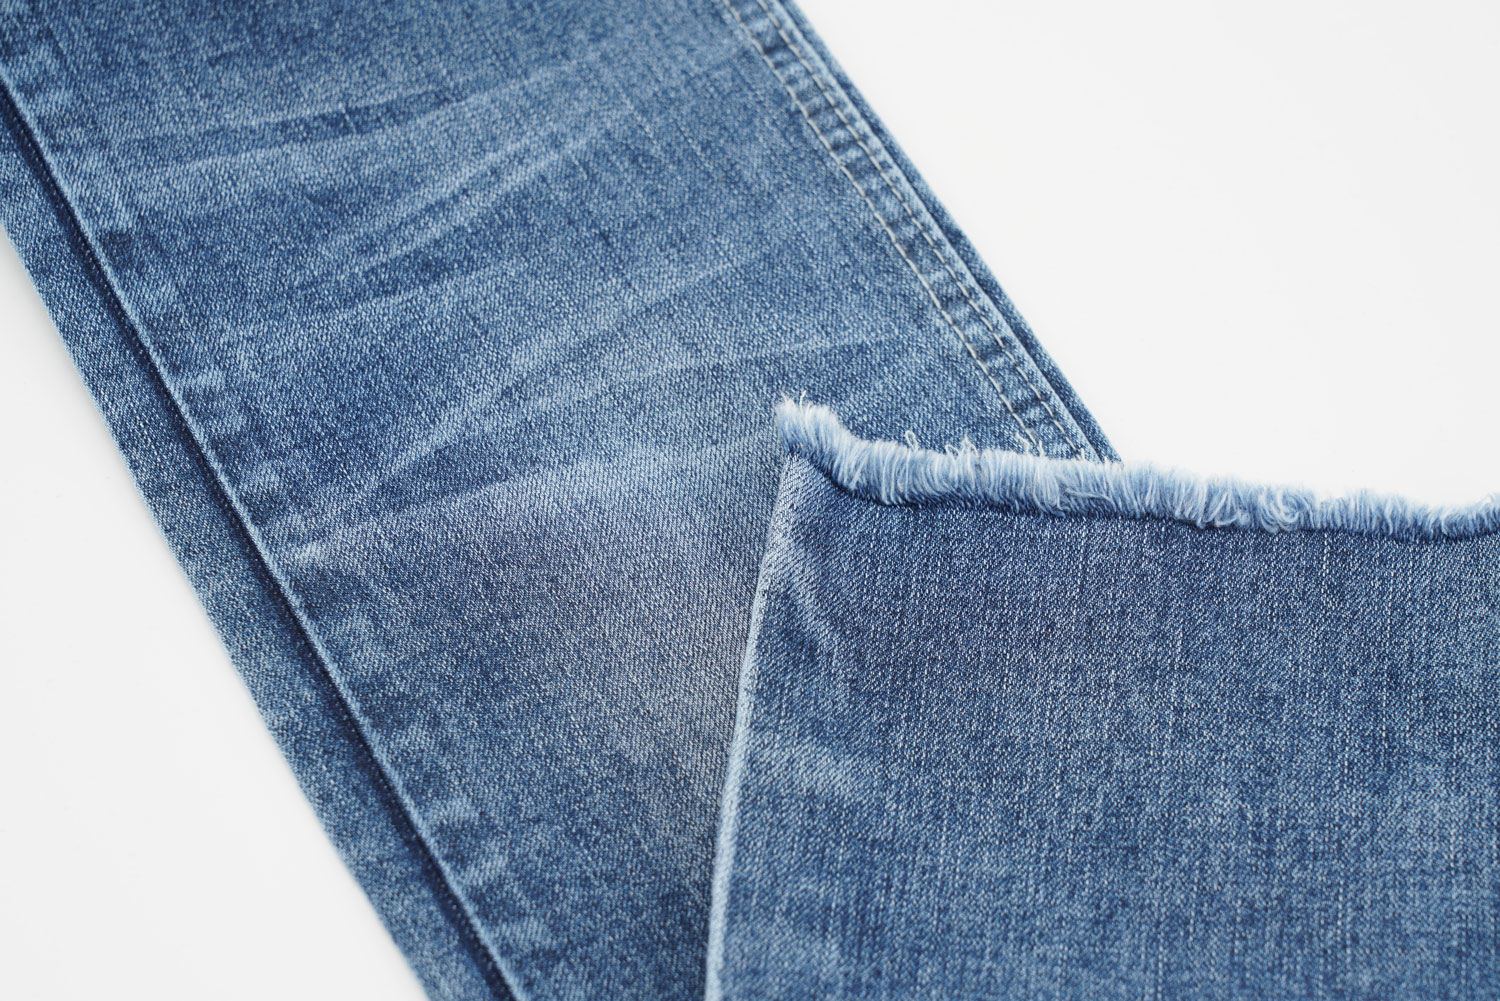 Good Stretch Denim Jean Fabric: Tips for Buying Good Stretch Denim Jean Fabric 1